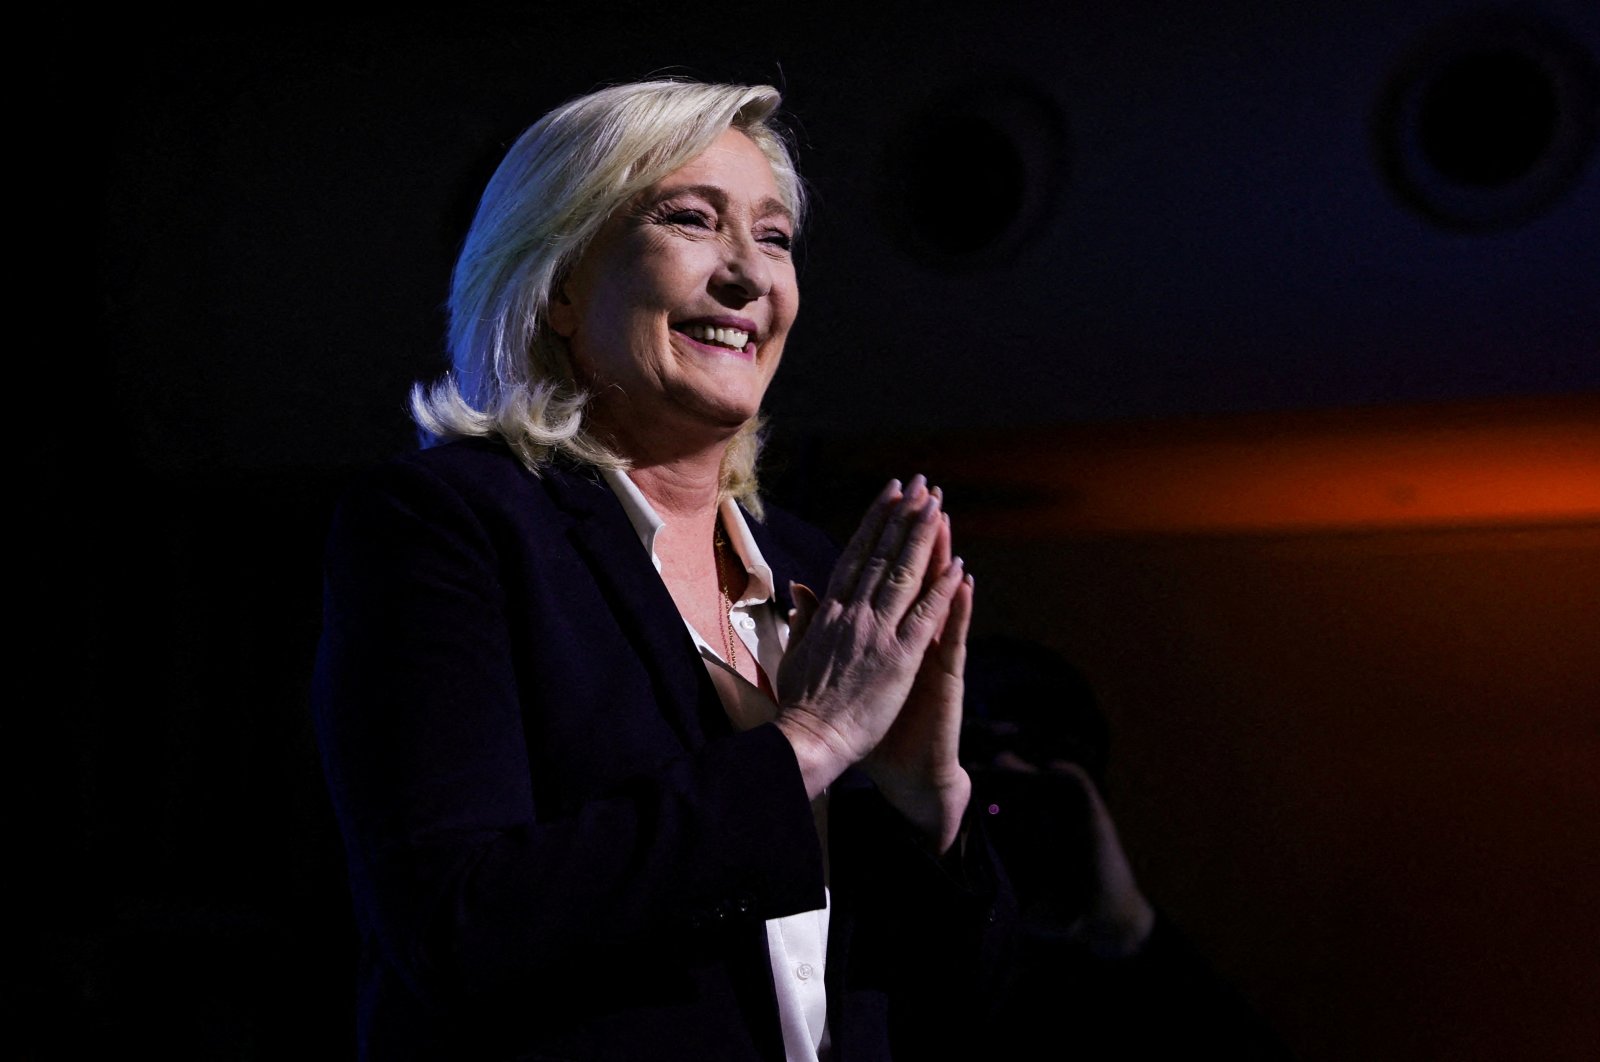 Marine Le Pen, leader of French far-right National Rally (Rassemblement National) party and candidate for the 2022 French presidential election, gestures as she appears on stage after partial results in the first round of the 2022 French presidential election are announced, in Paris, in Paris, France, April 10, 2022. (Reuters Photo)